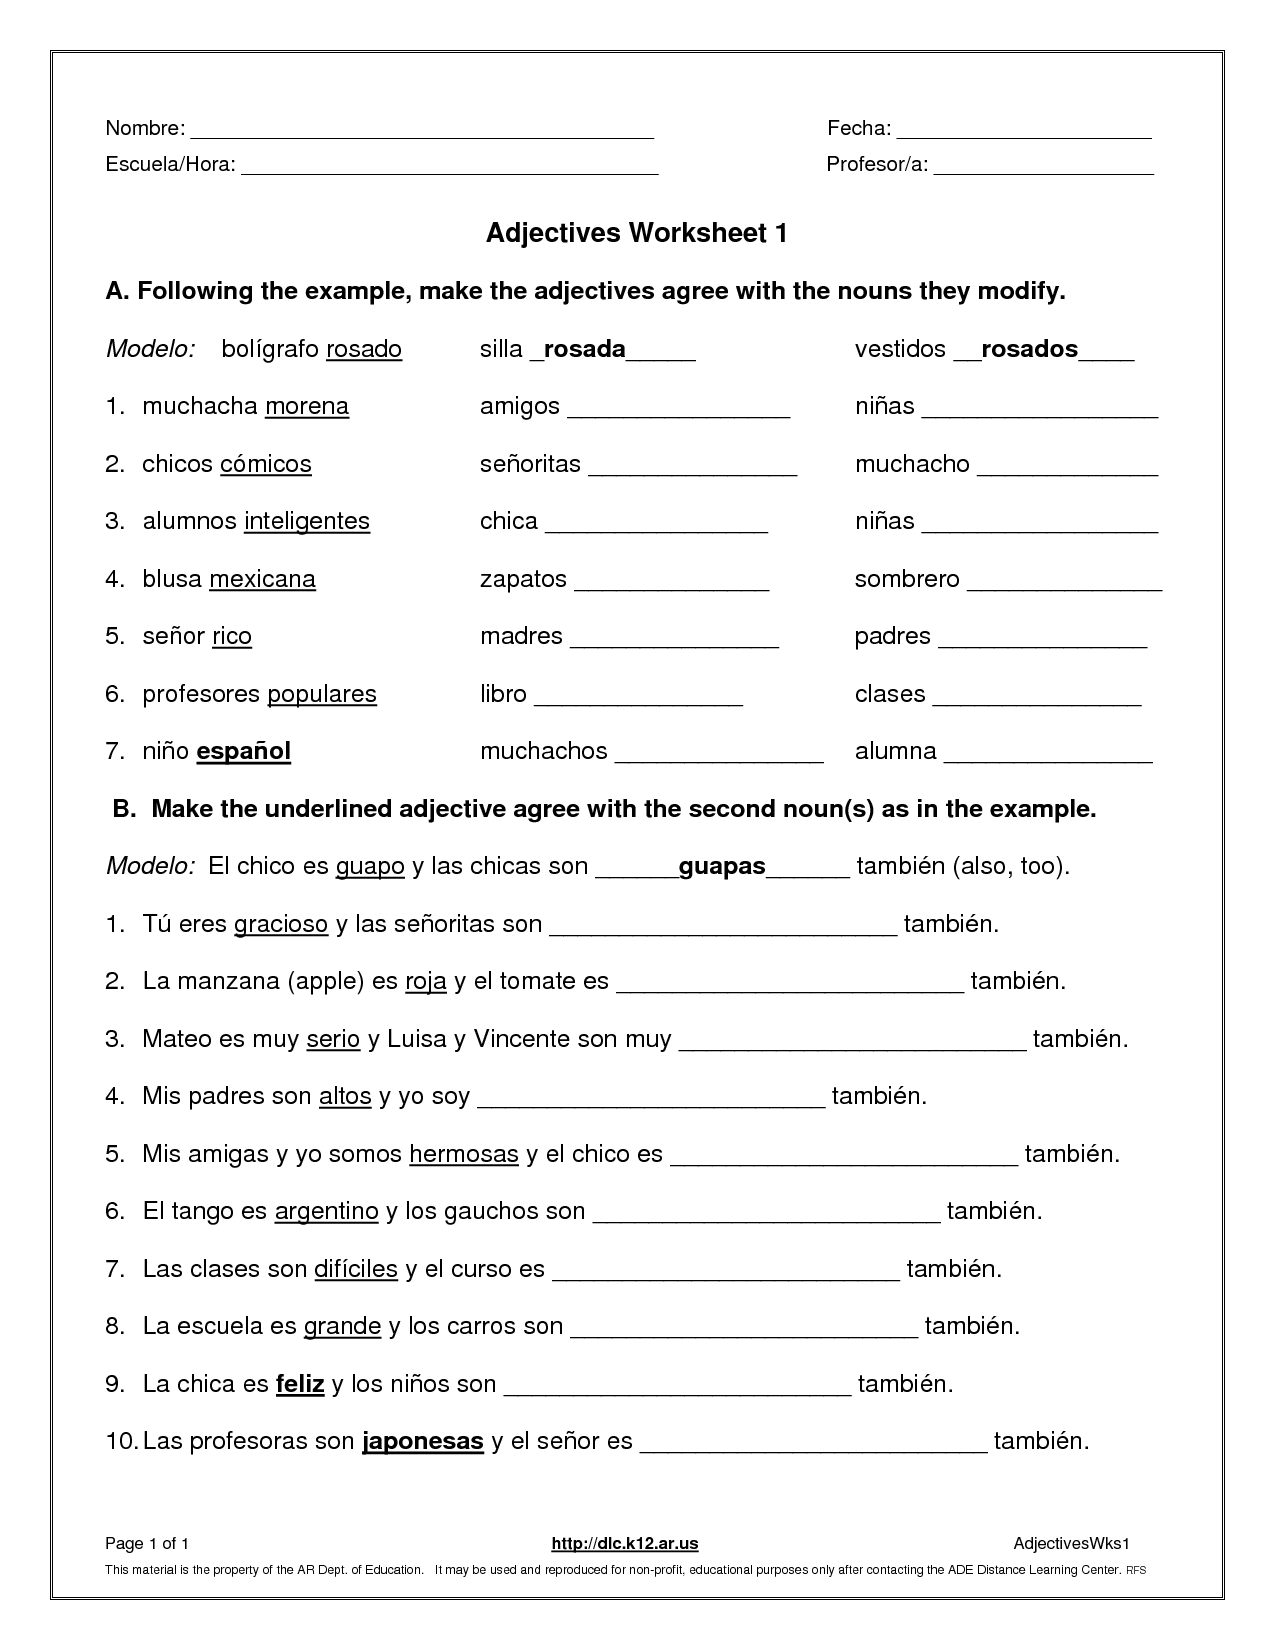 adjectives-pictures-worksheets-driverlayer-search-engine